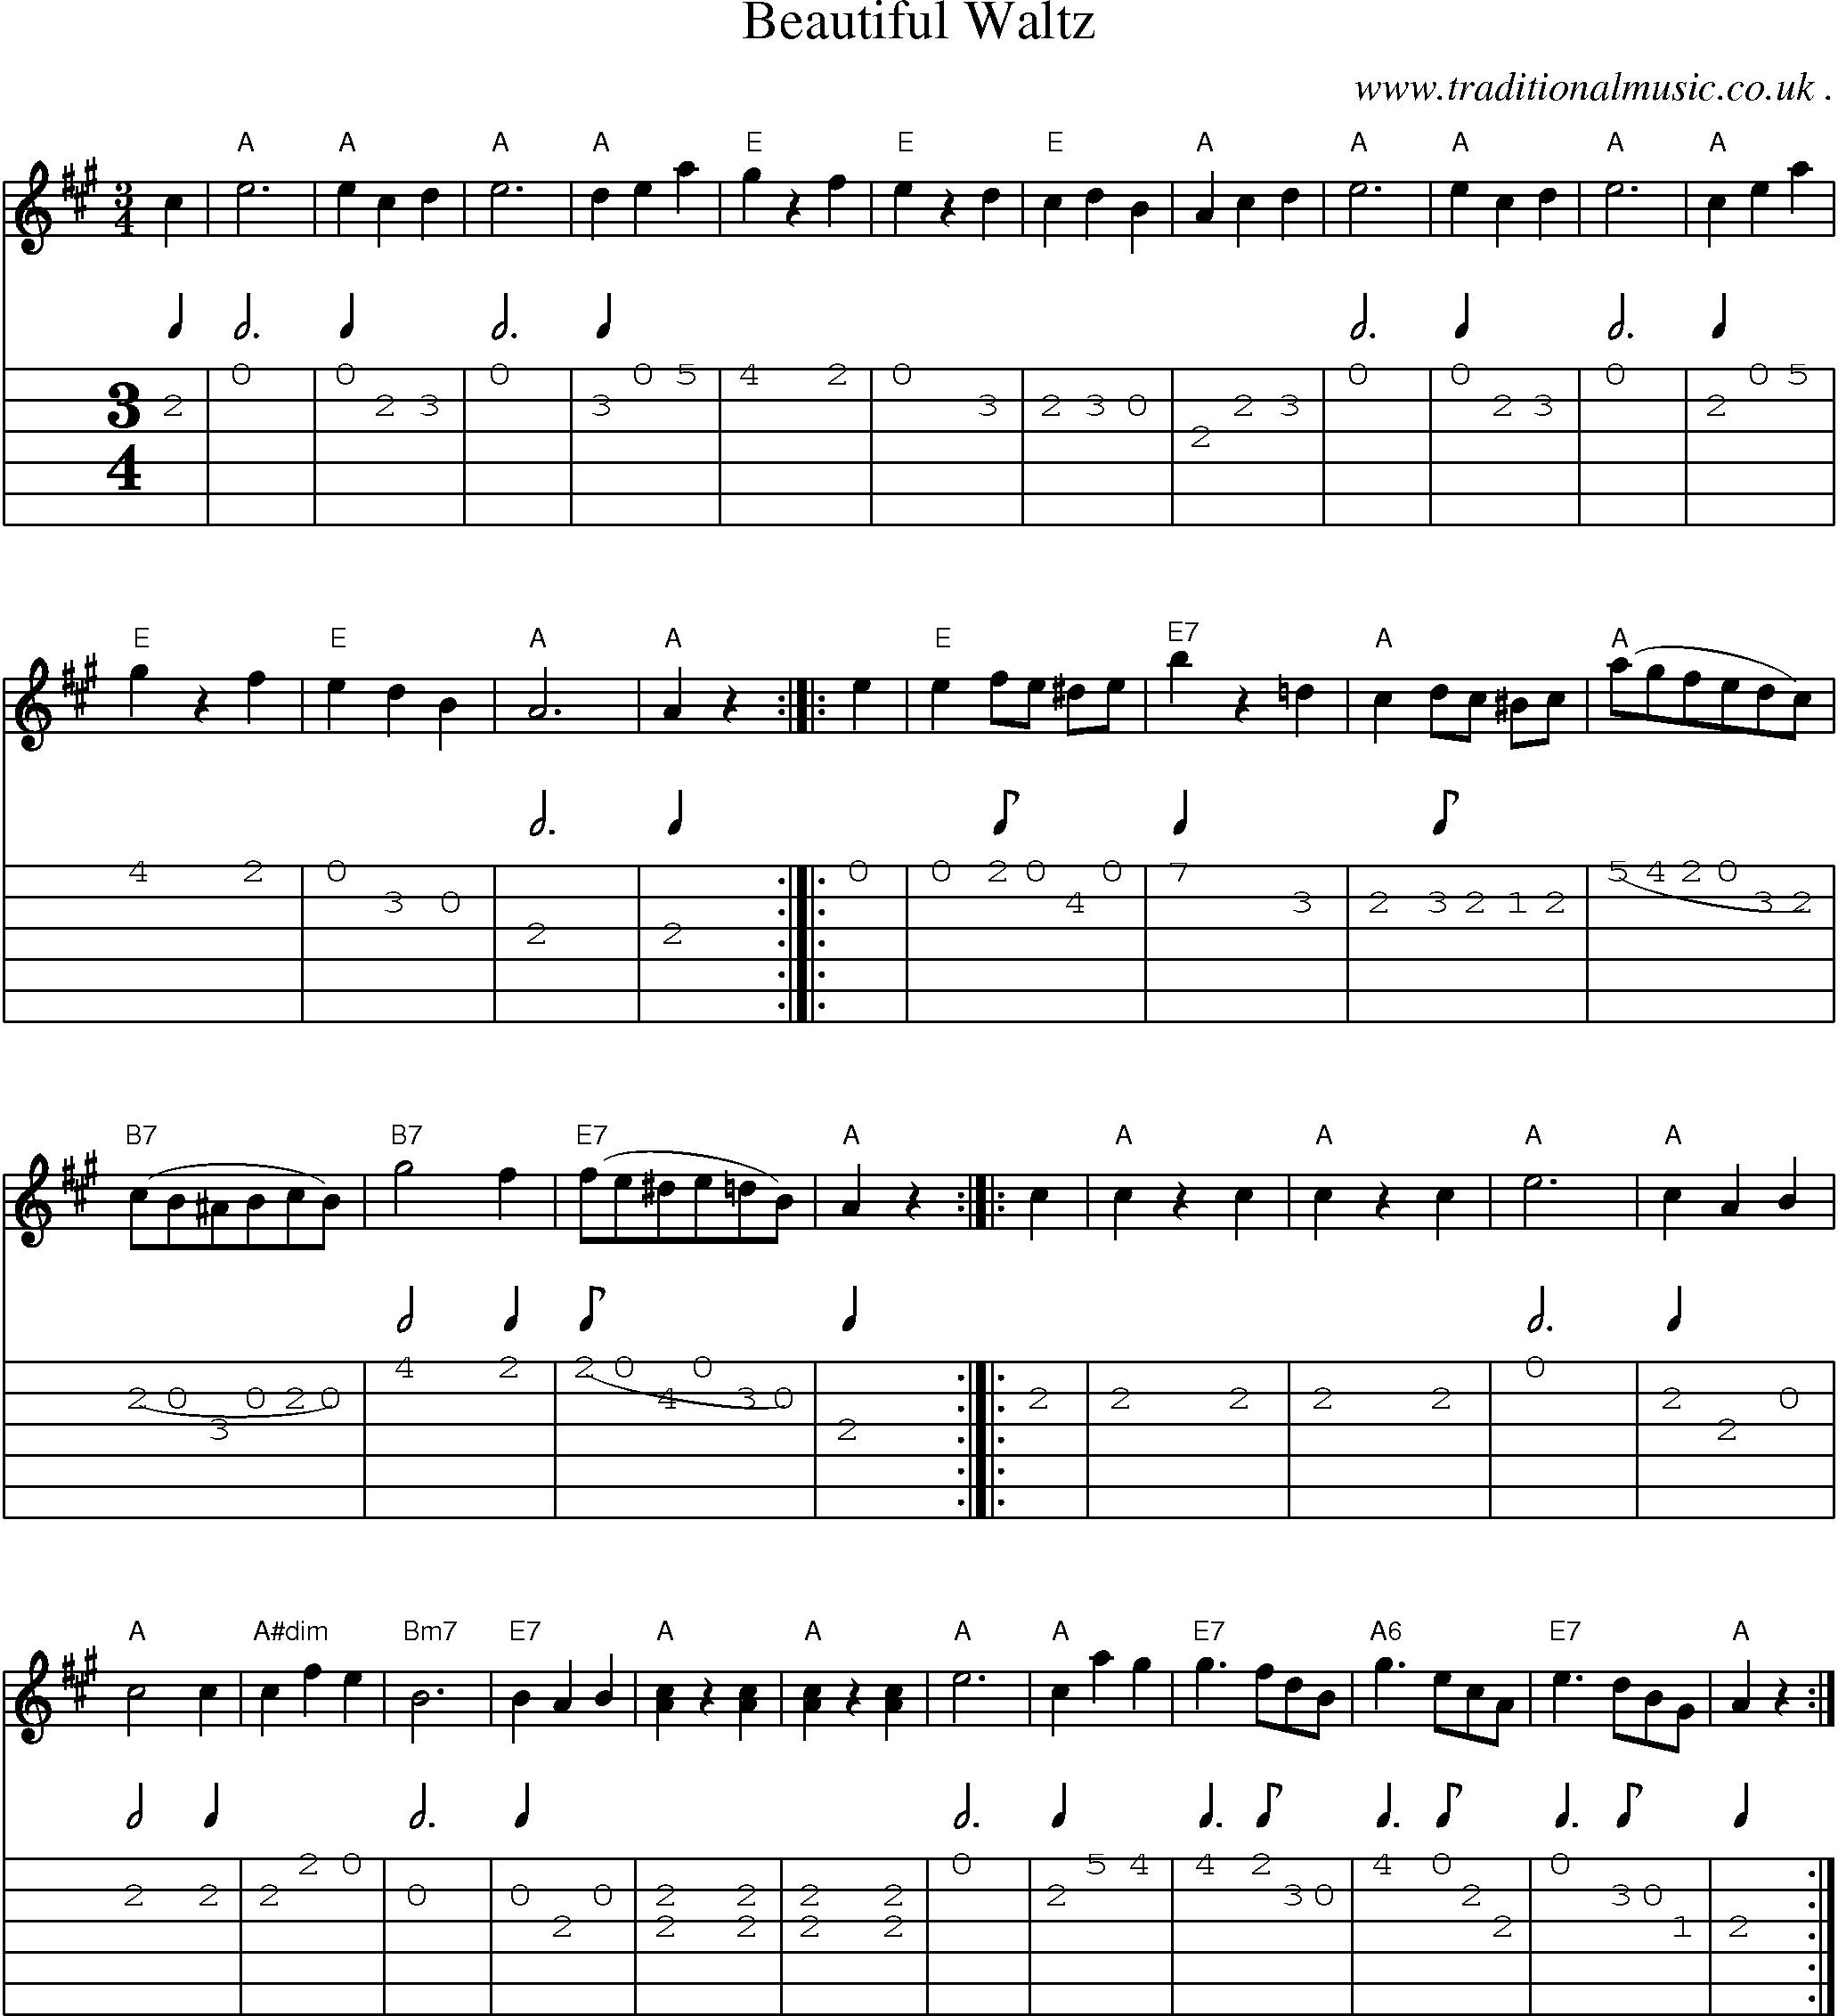 Sheet-Music and Guitar Tabs for Beautiful Waltz